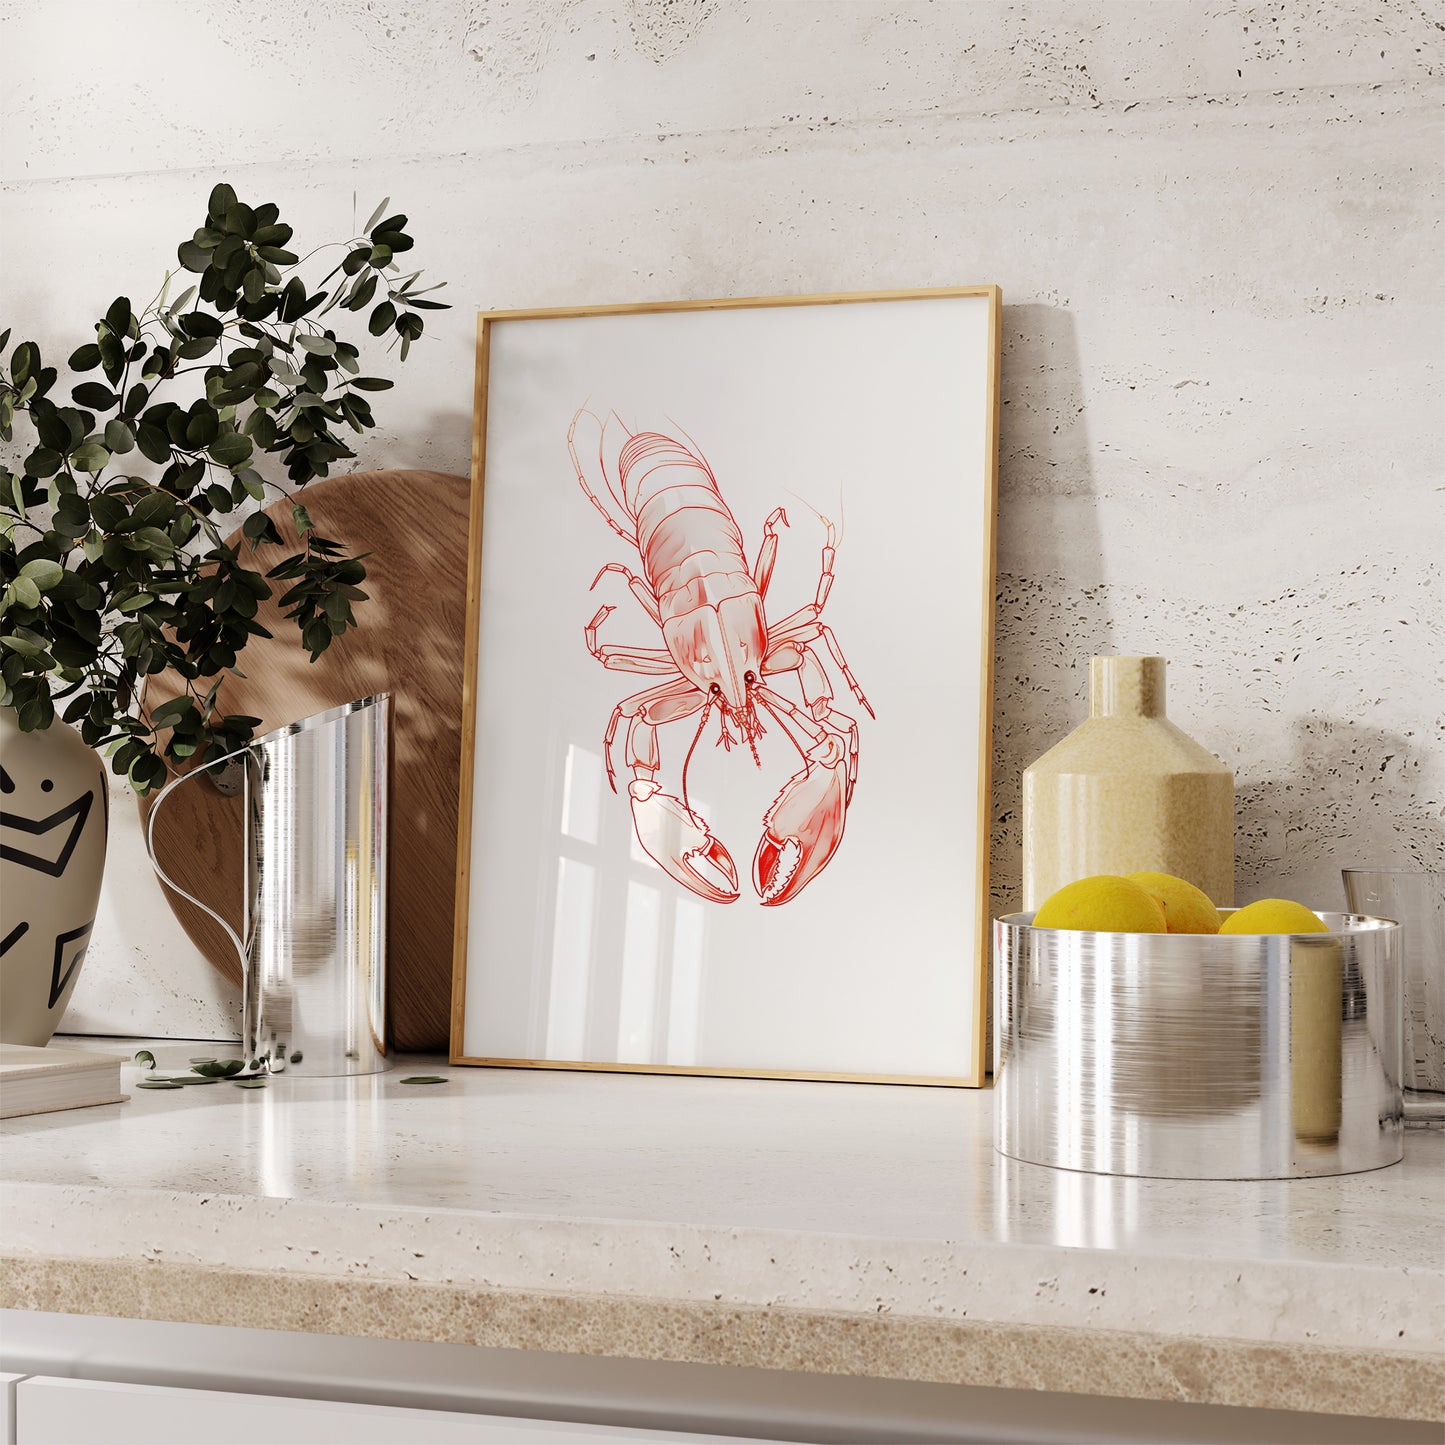 Framed lobster illustration on a kitchen counter with decorative items.